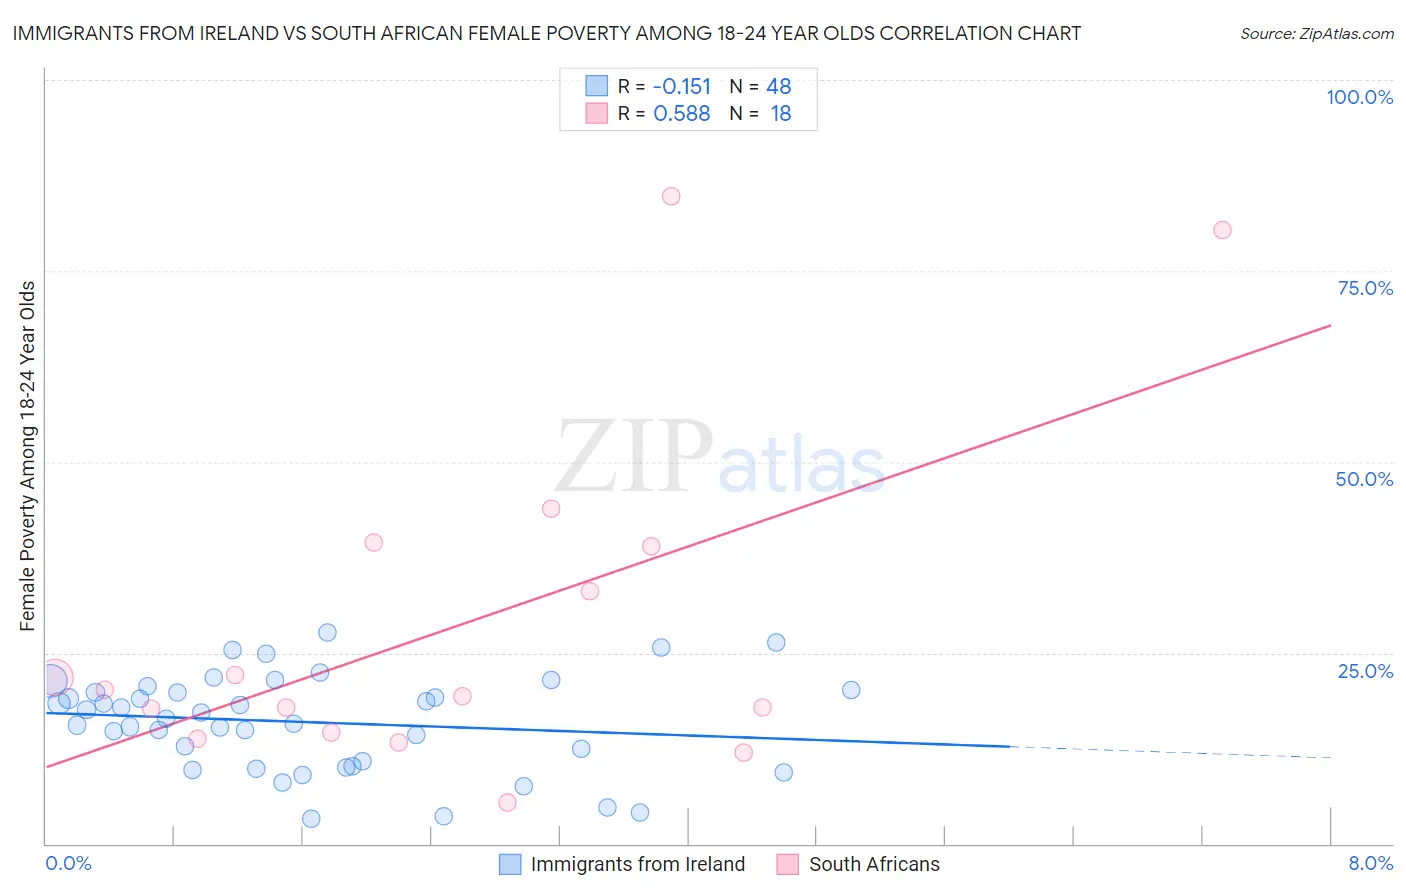 Immigrants from Ireland vs South African Female Poverty Among 18-24 Year Olds